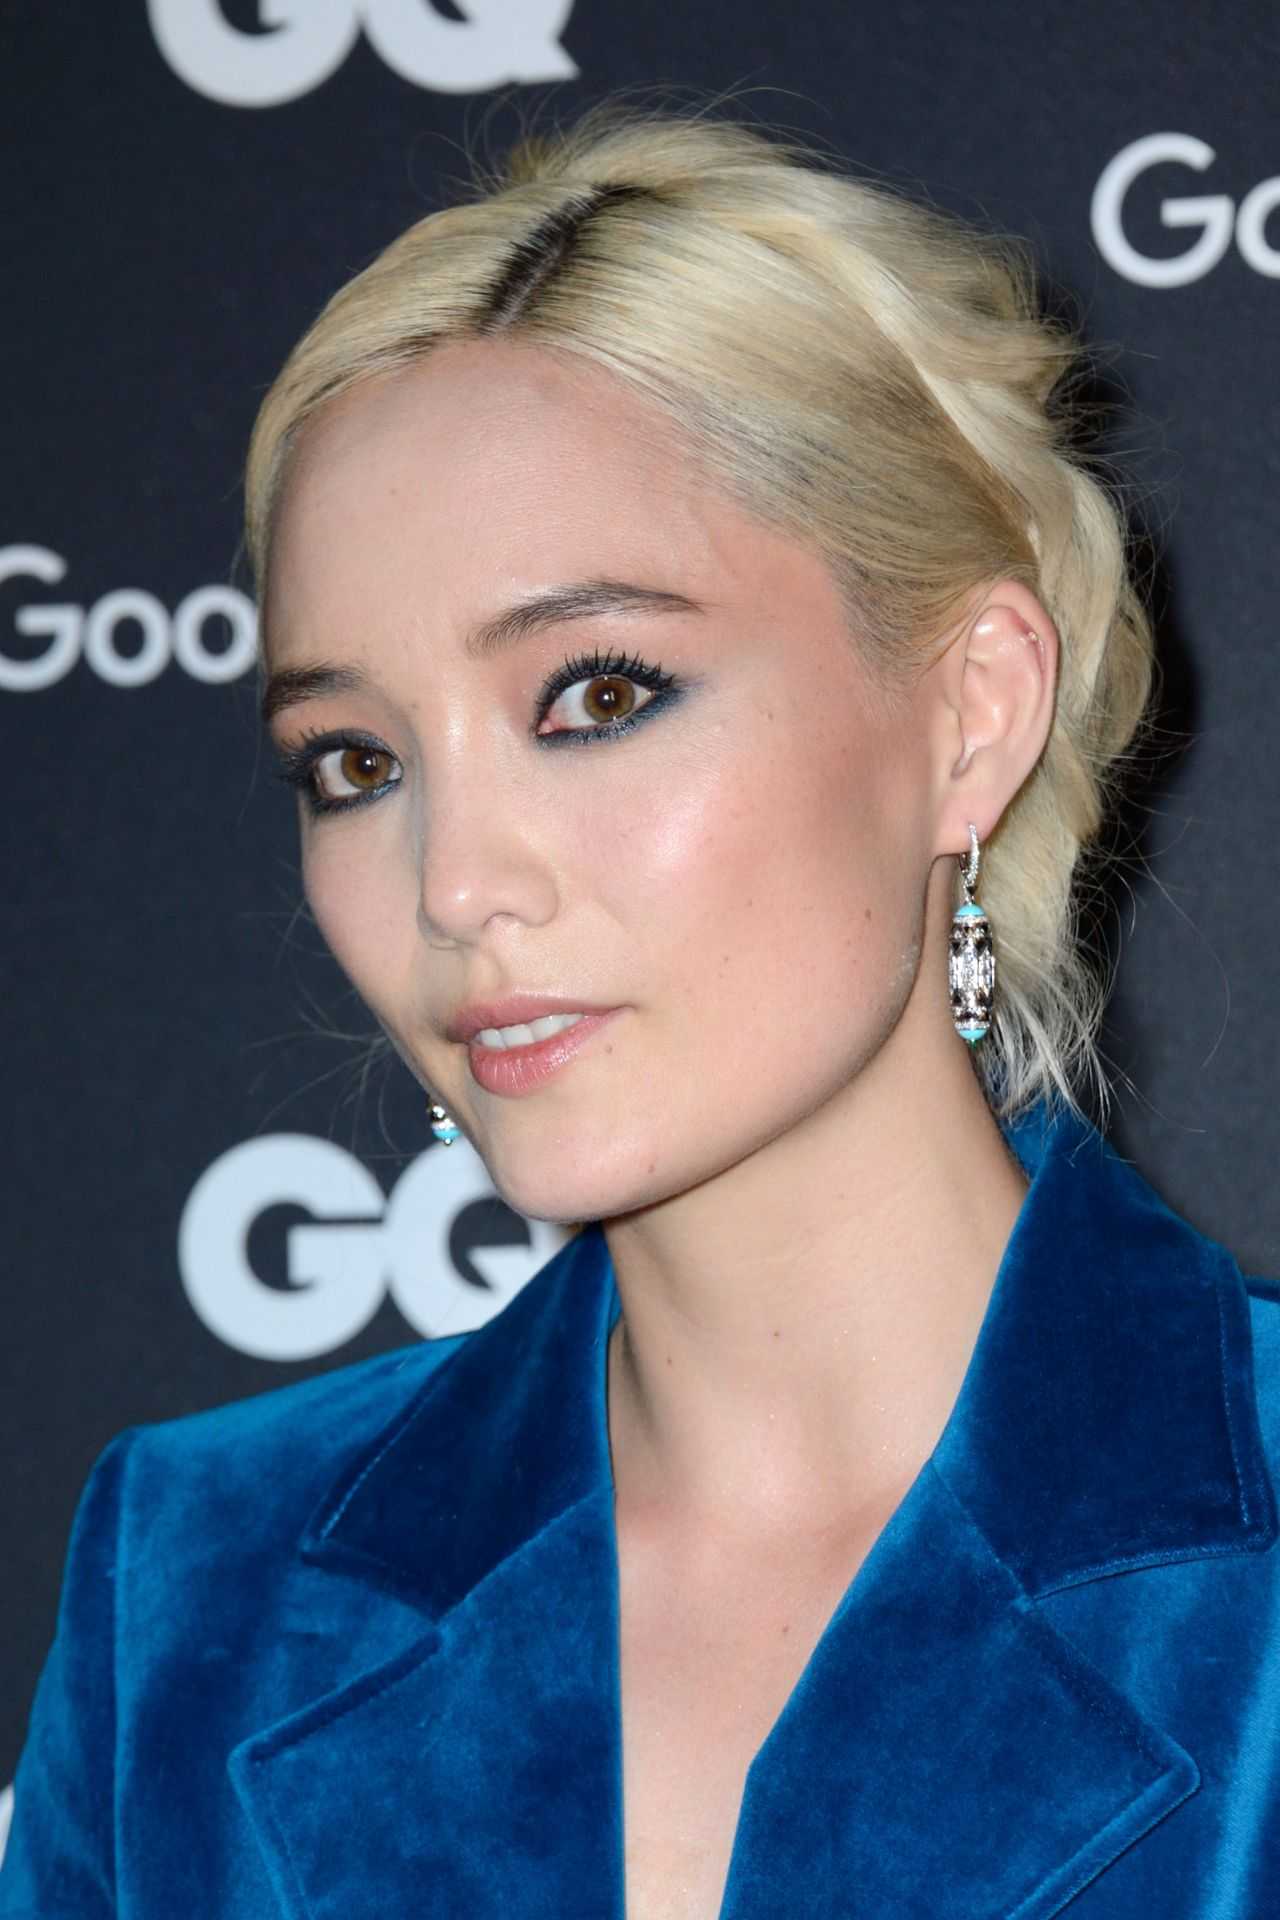 70+ Hot Pictures Of Pom Klementieff Who Plays Mantis In Marvel Cinematic Universe 3